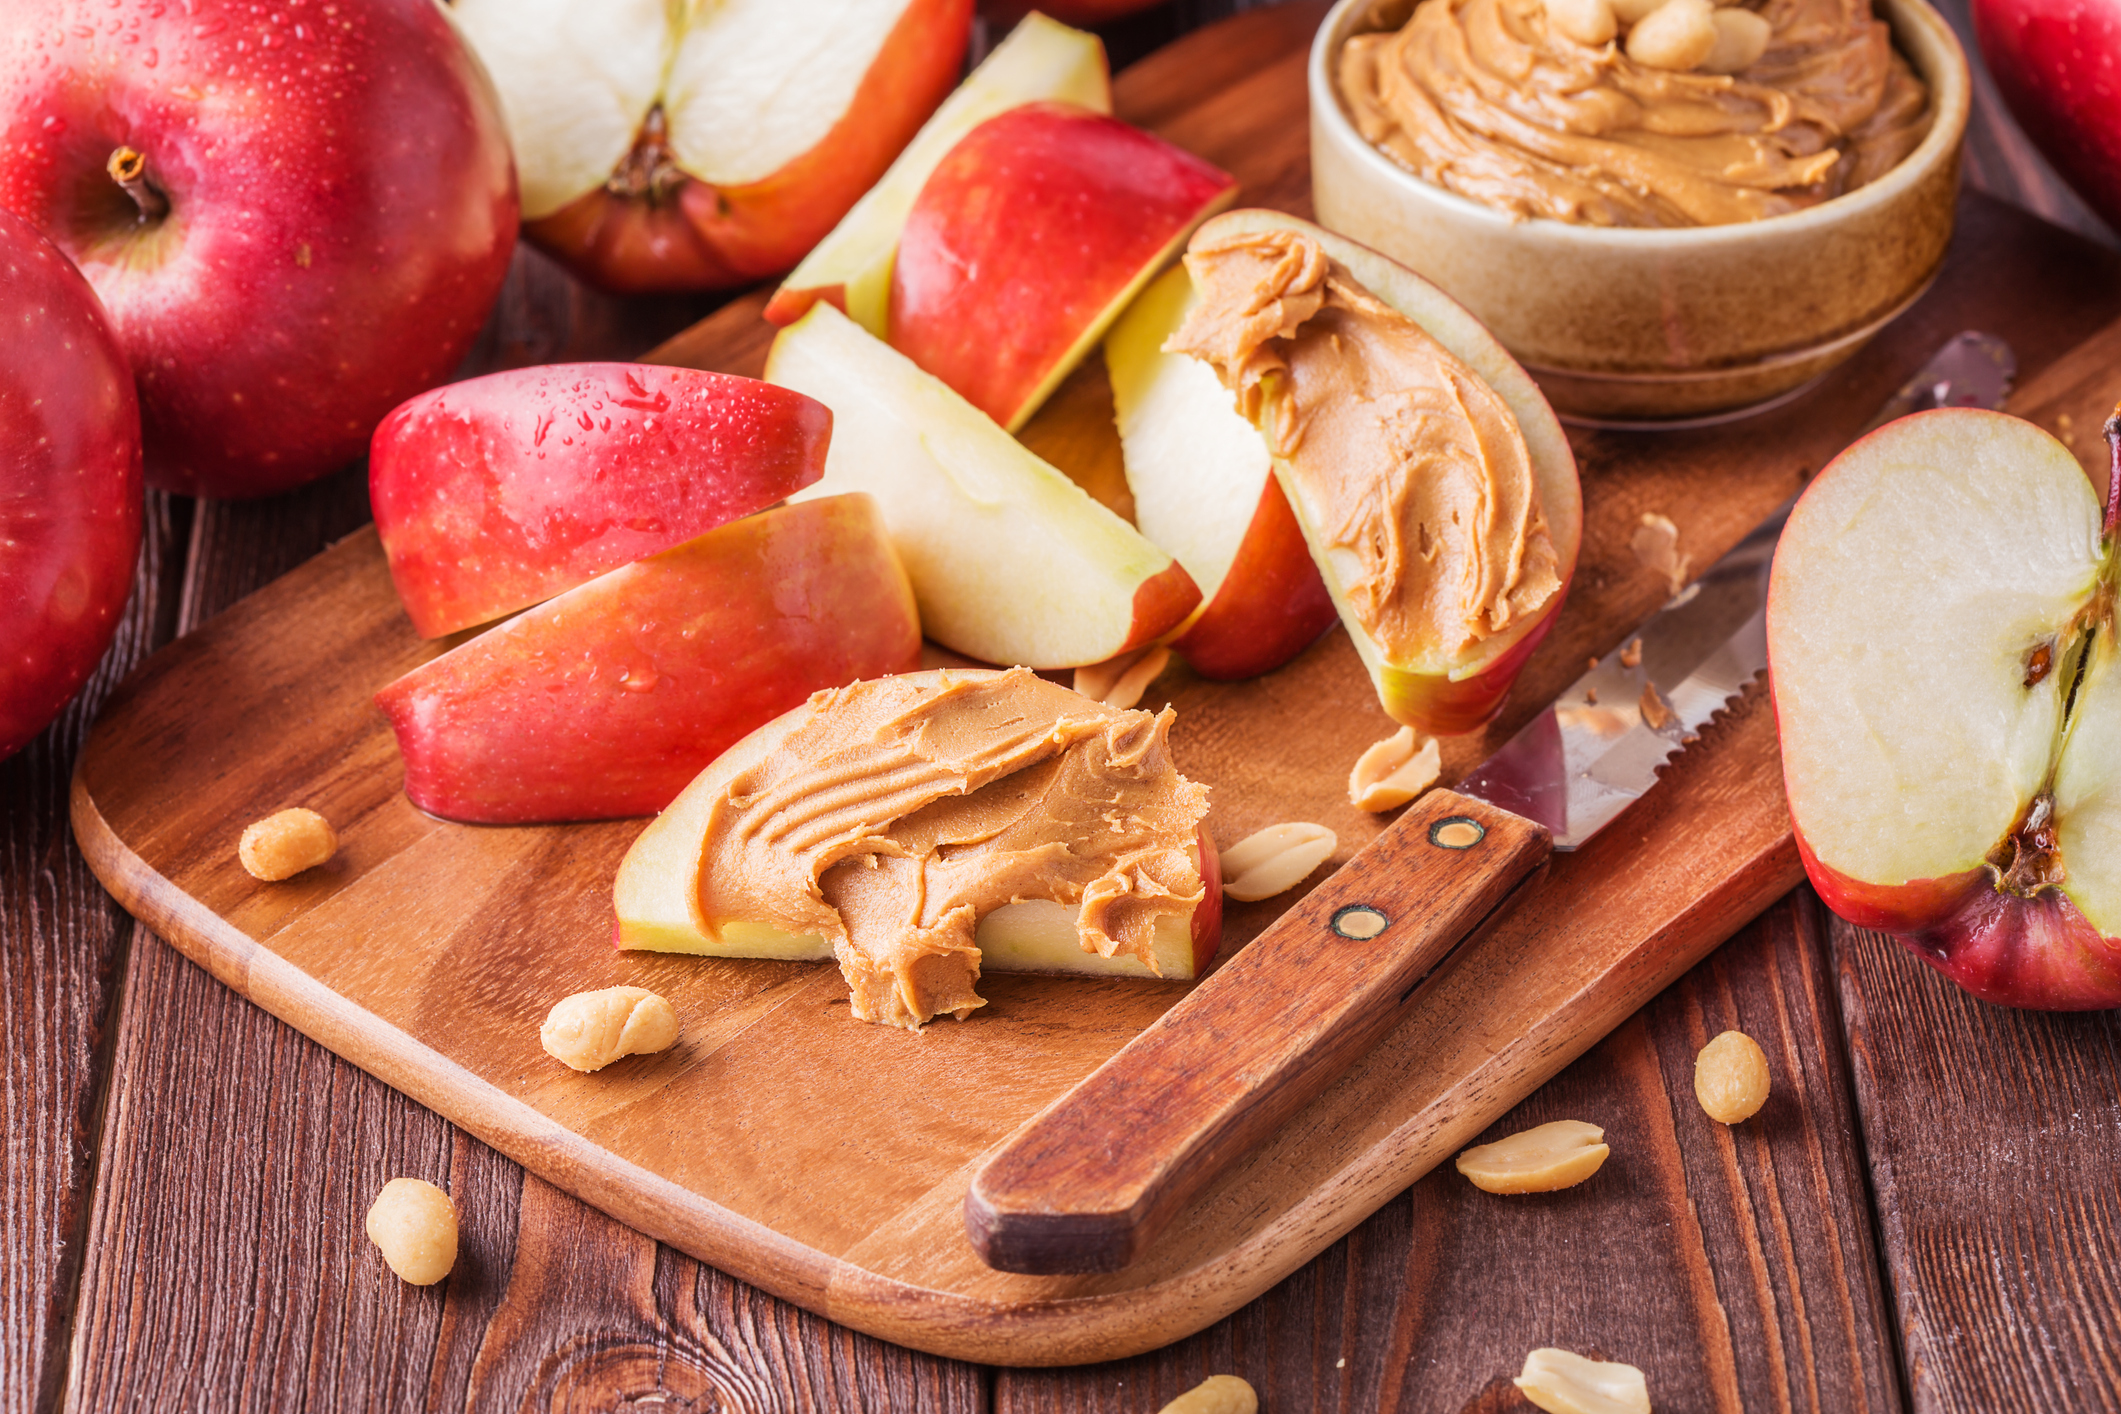 A Major Side Effect Of Eating Peanut Butter Every Day